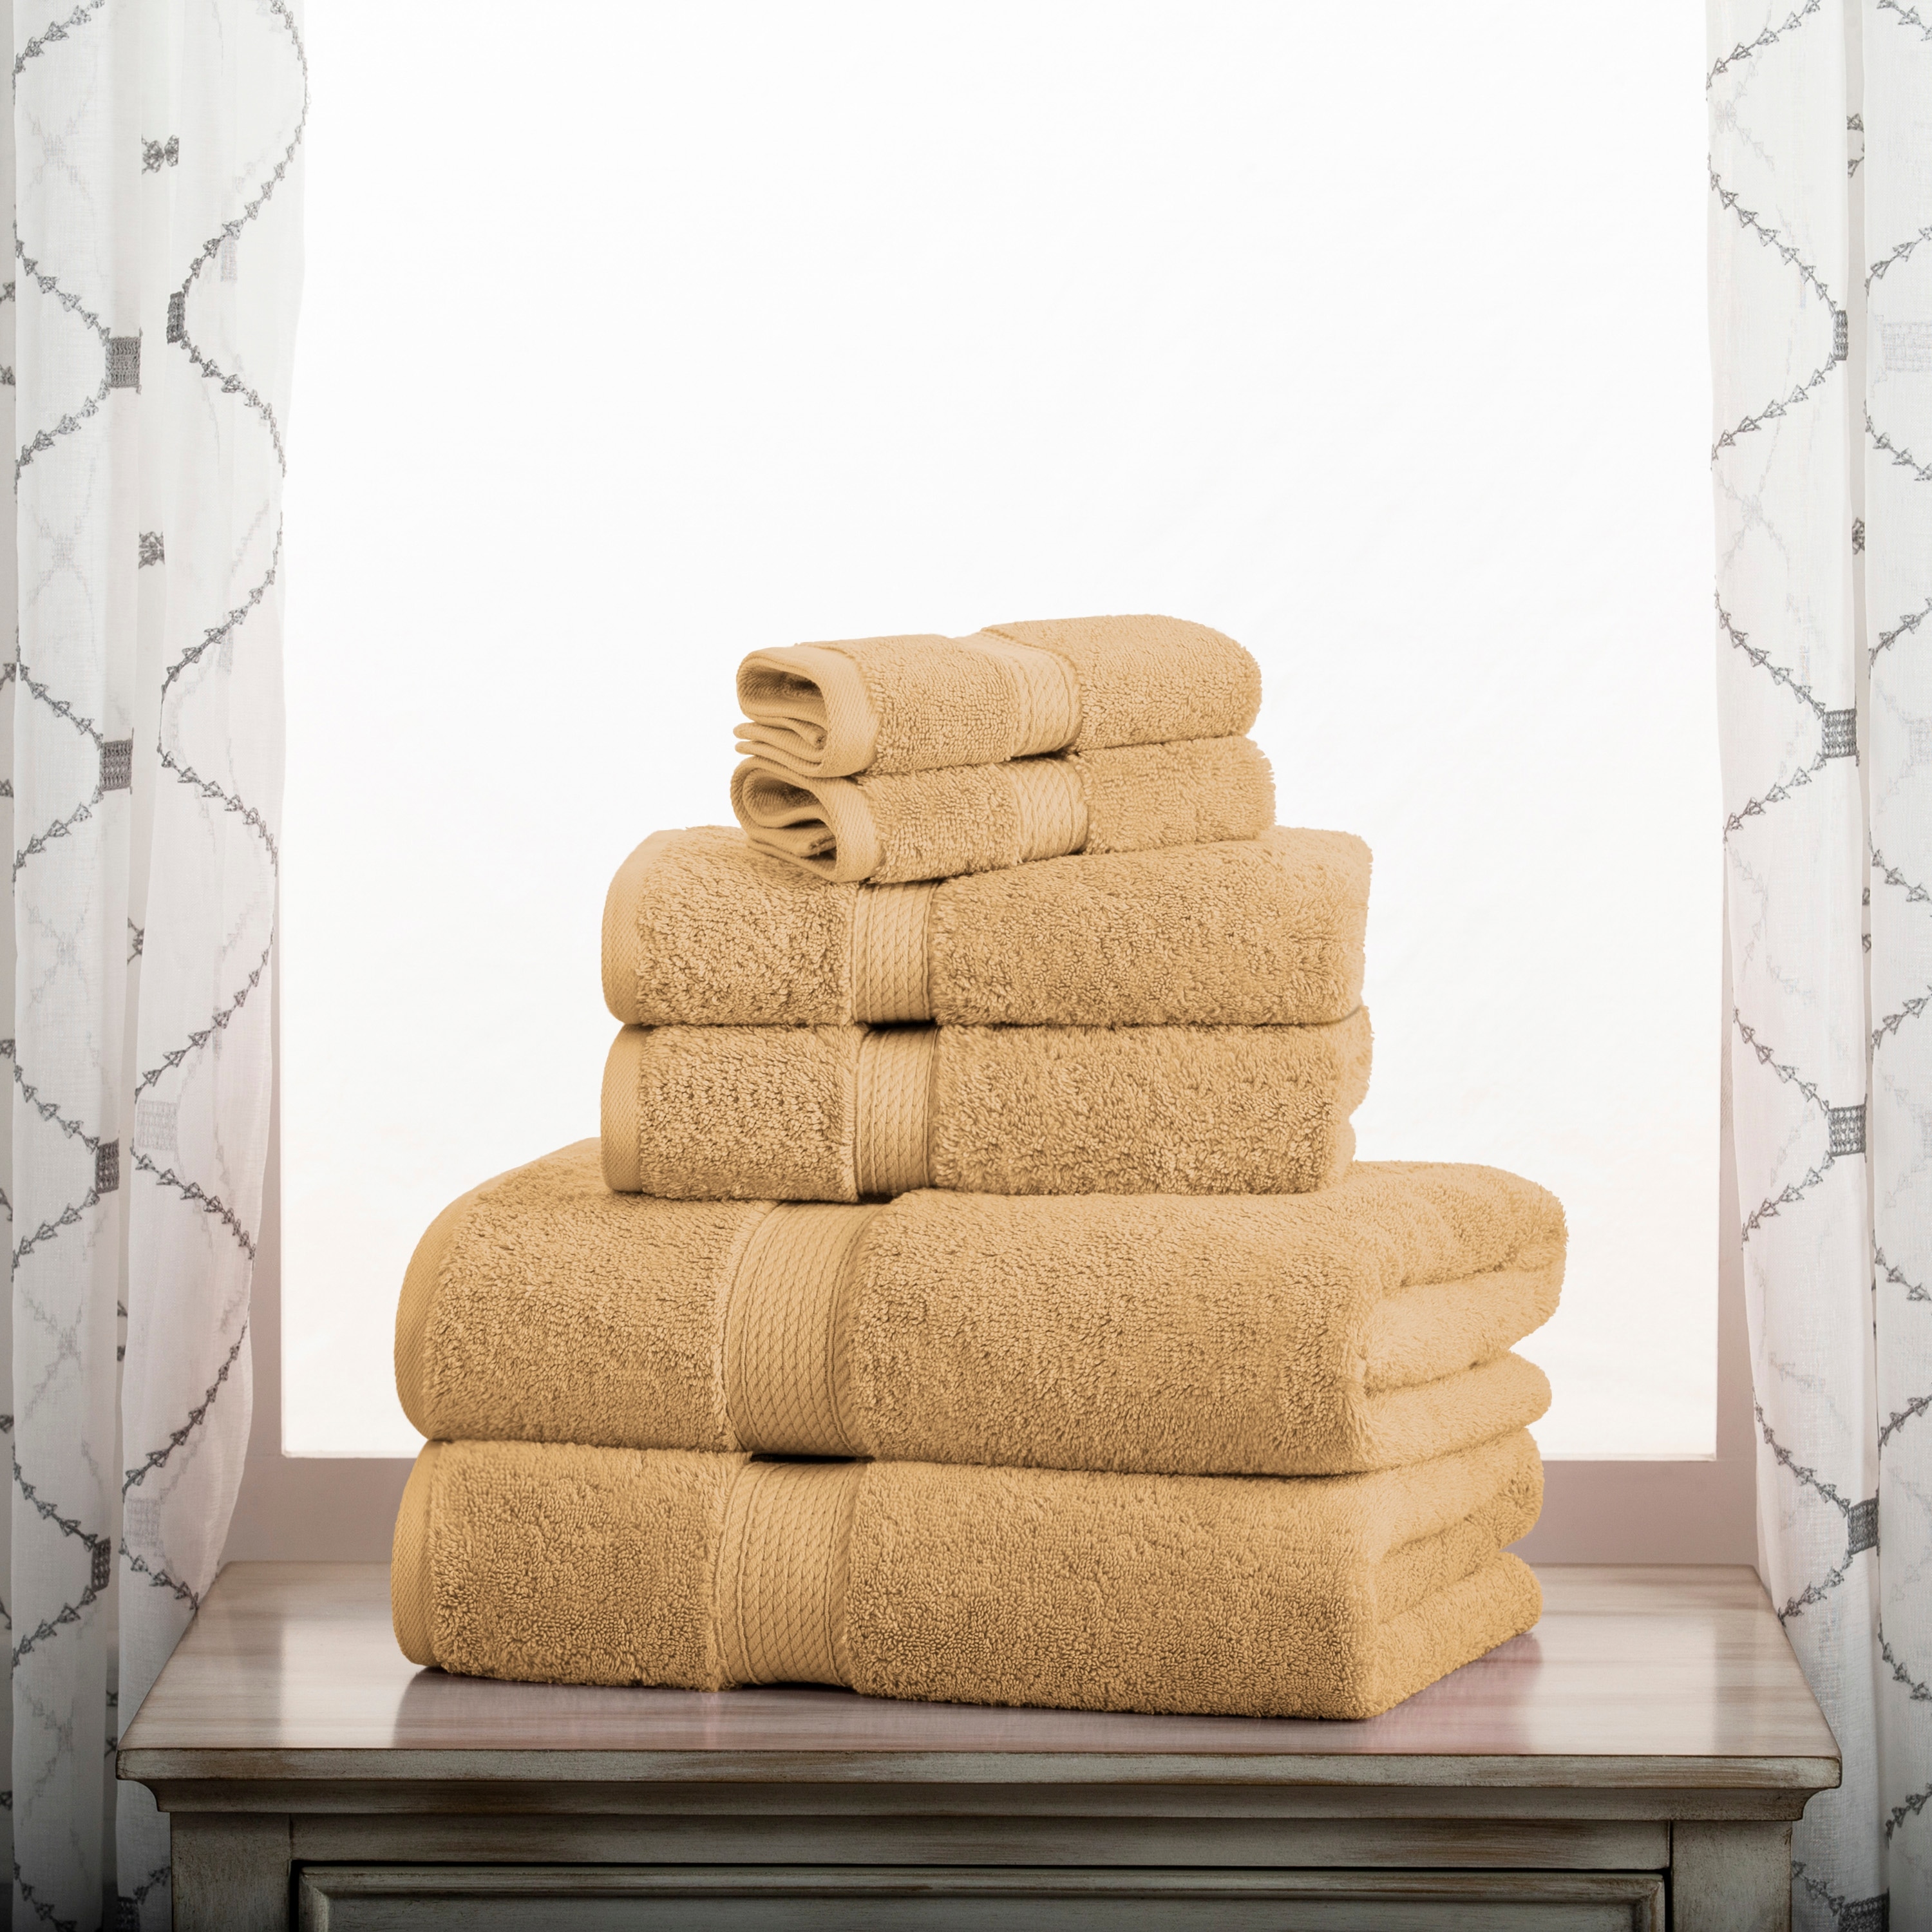 https://ak1.ostkcdn.com/images/products/is/images/direct/c5976d7a05f83d12b2a546779afbc5d1550a042e/Egyptian-Cotton-Heavyweight-Solid-Plush-Towel-Set-by-Superior.jpg